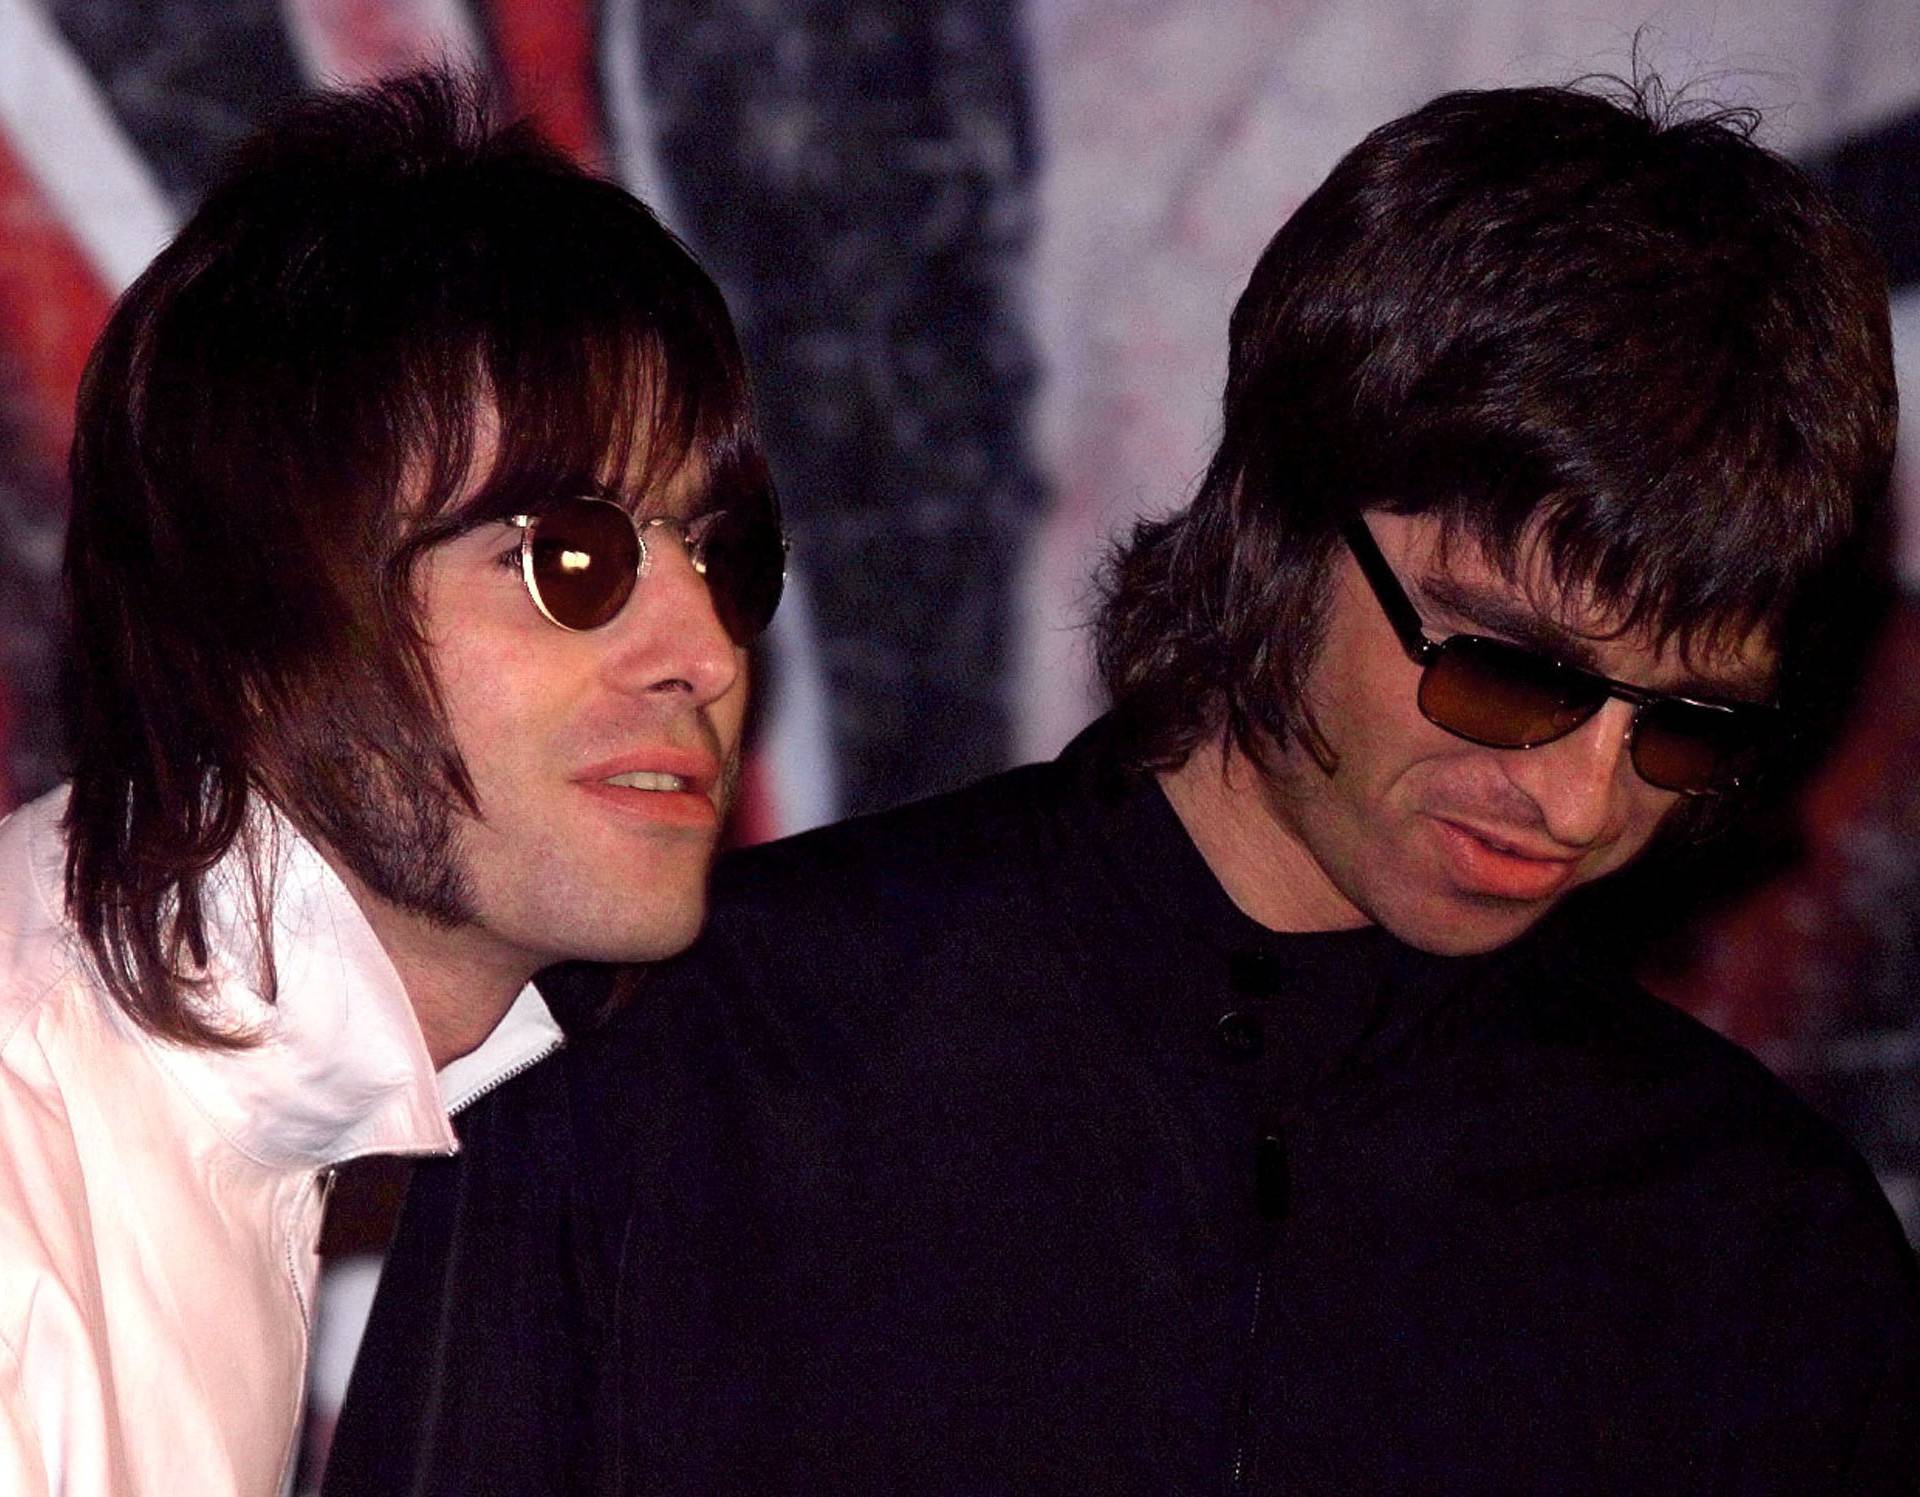 FILE PHOTO: Liam and Noel (R) Gallagher, of the British rock band Oasis, wait for the start of a news conference at a pub in London